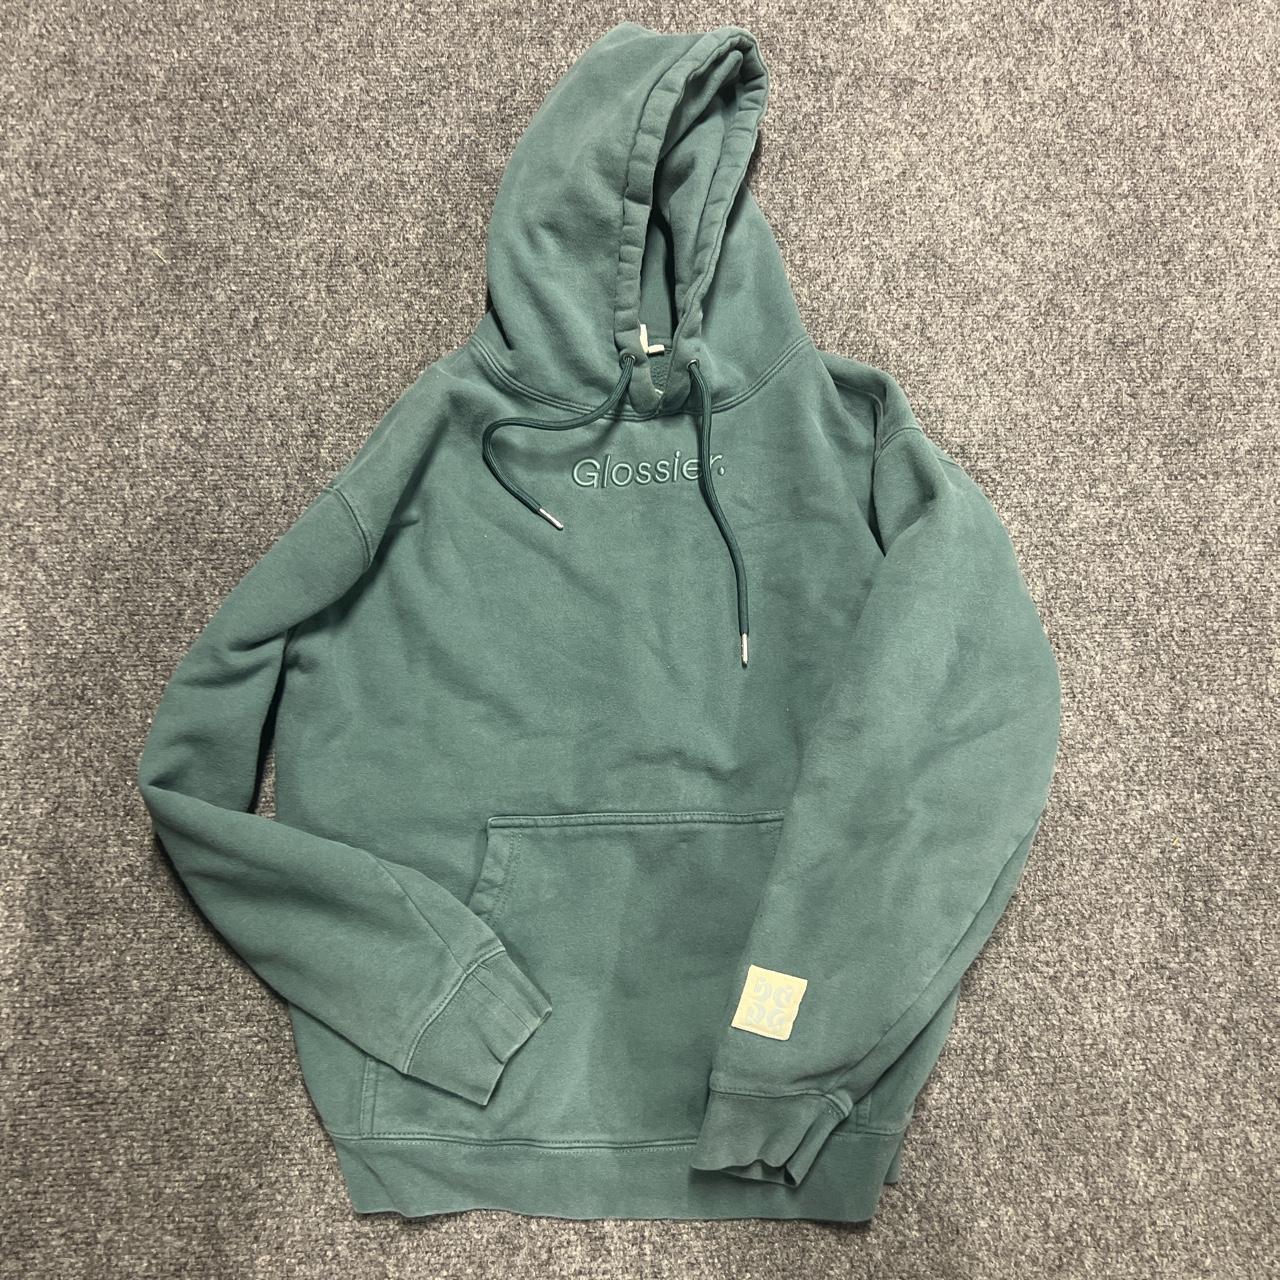 Glossier green limited edition hoodie perfect... - Depop